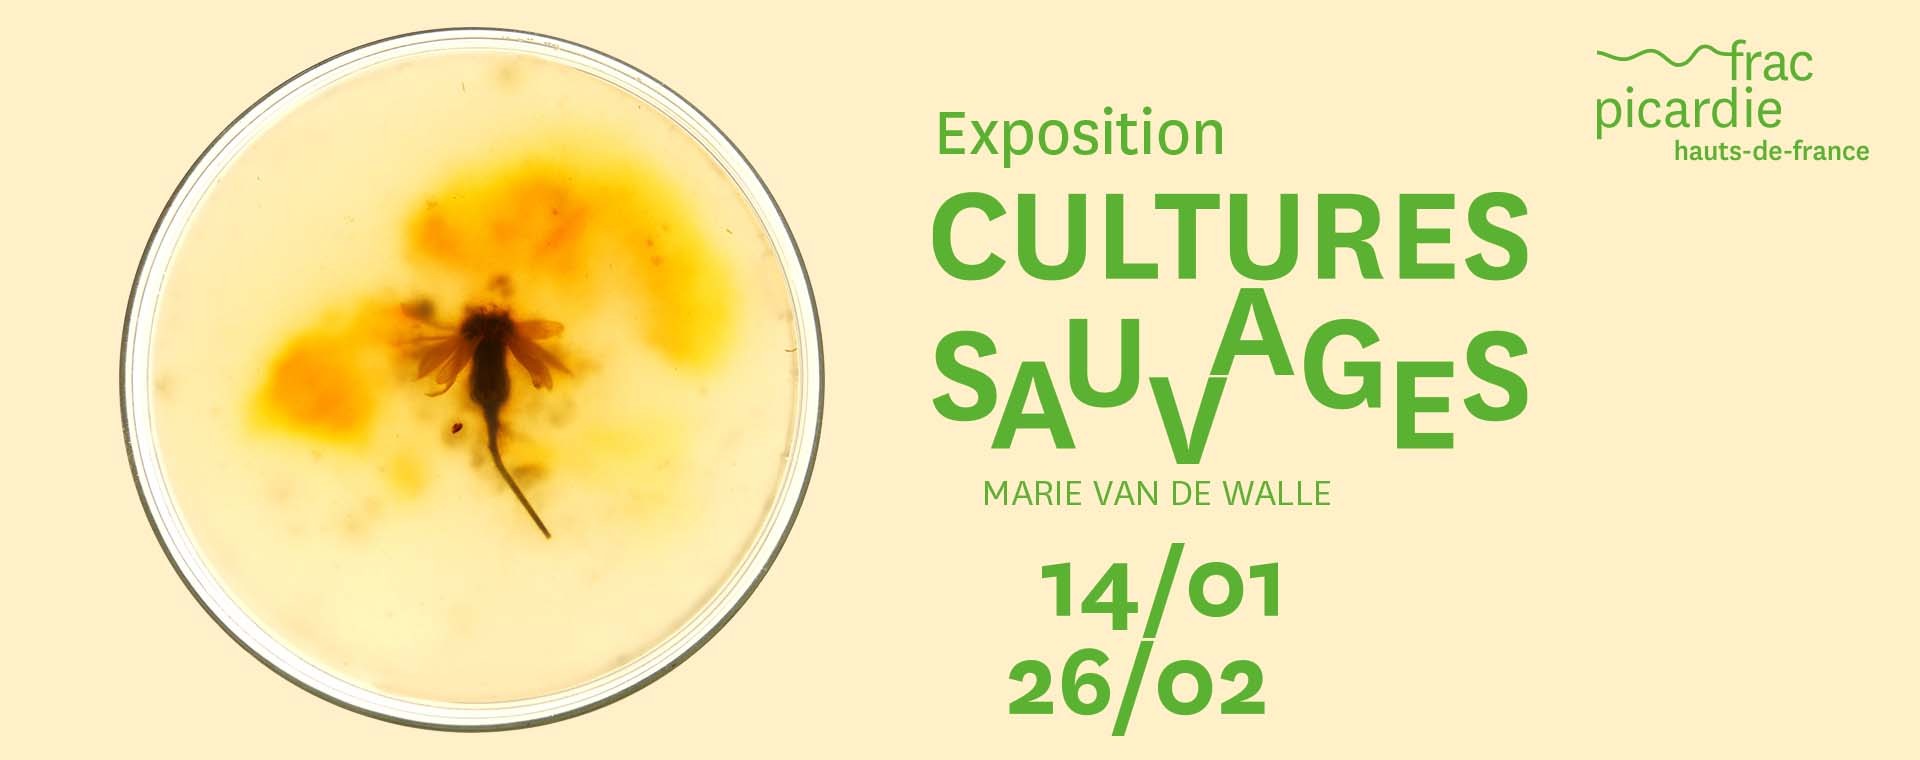 “Cultures Sauvages”